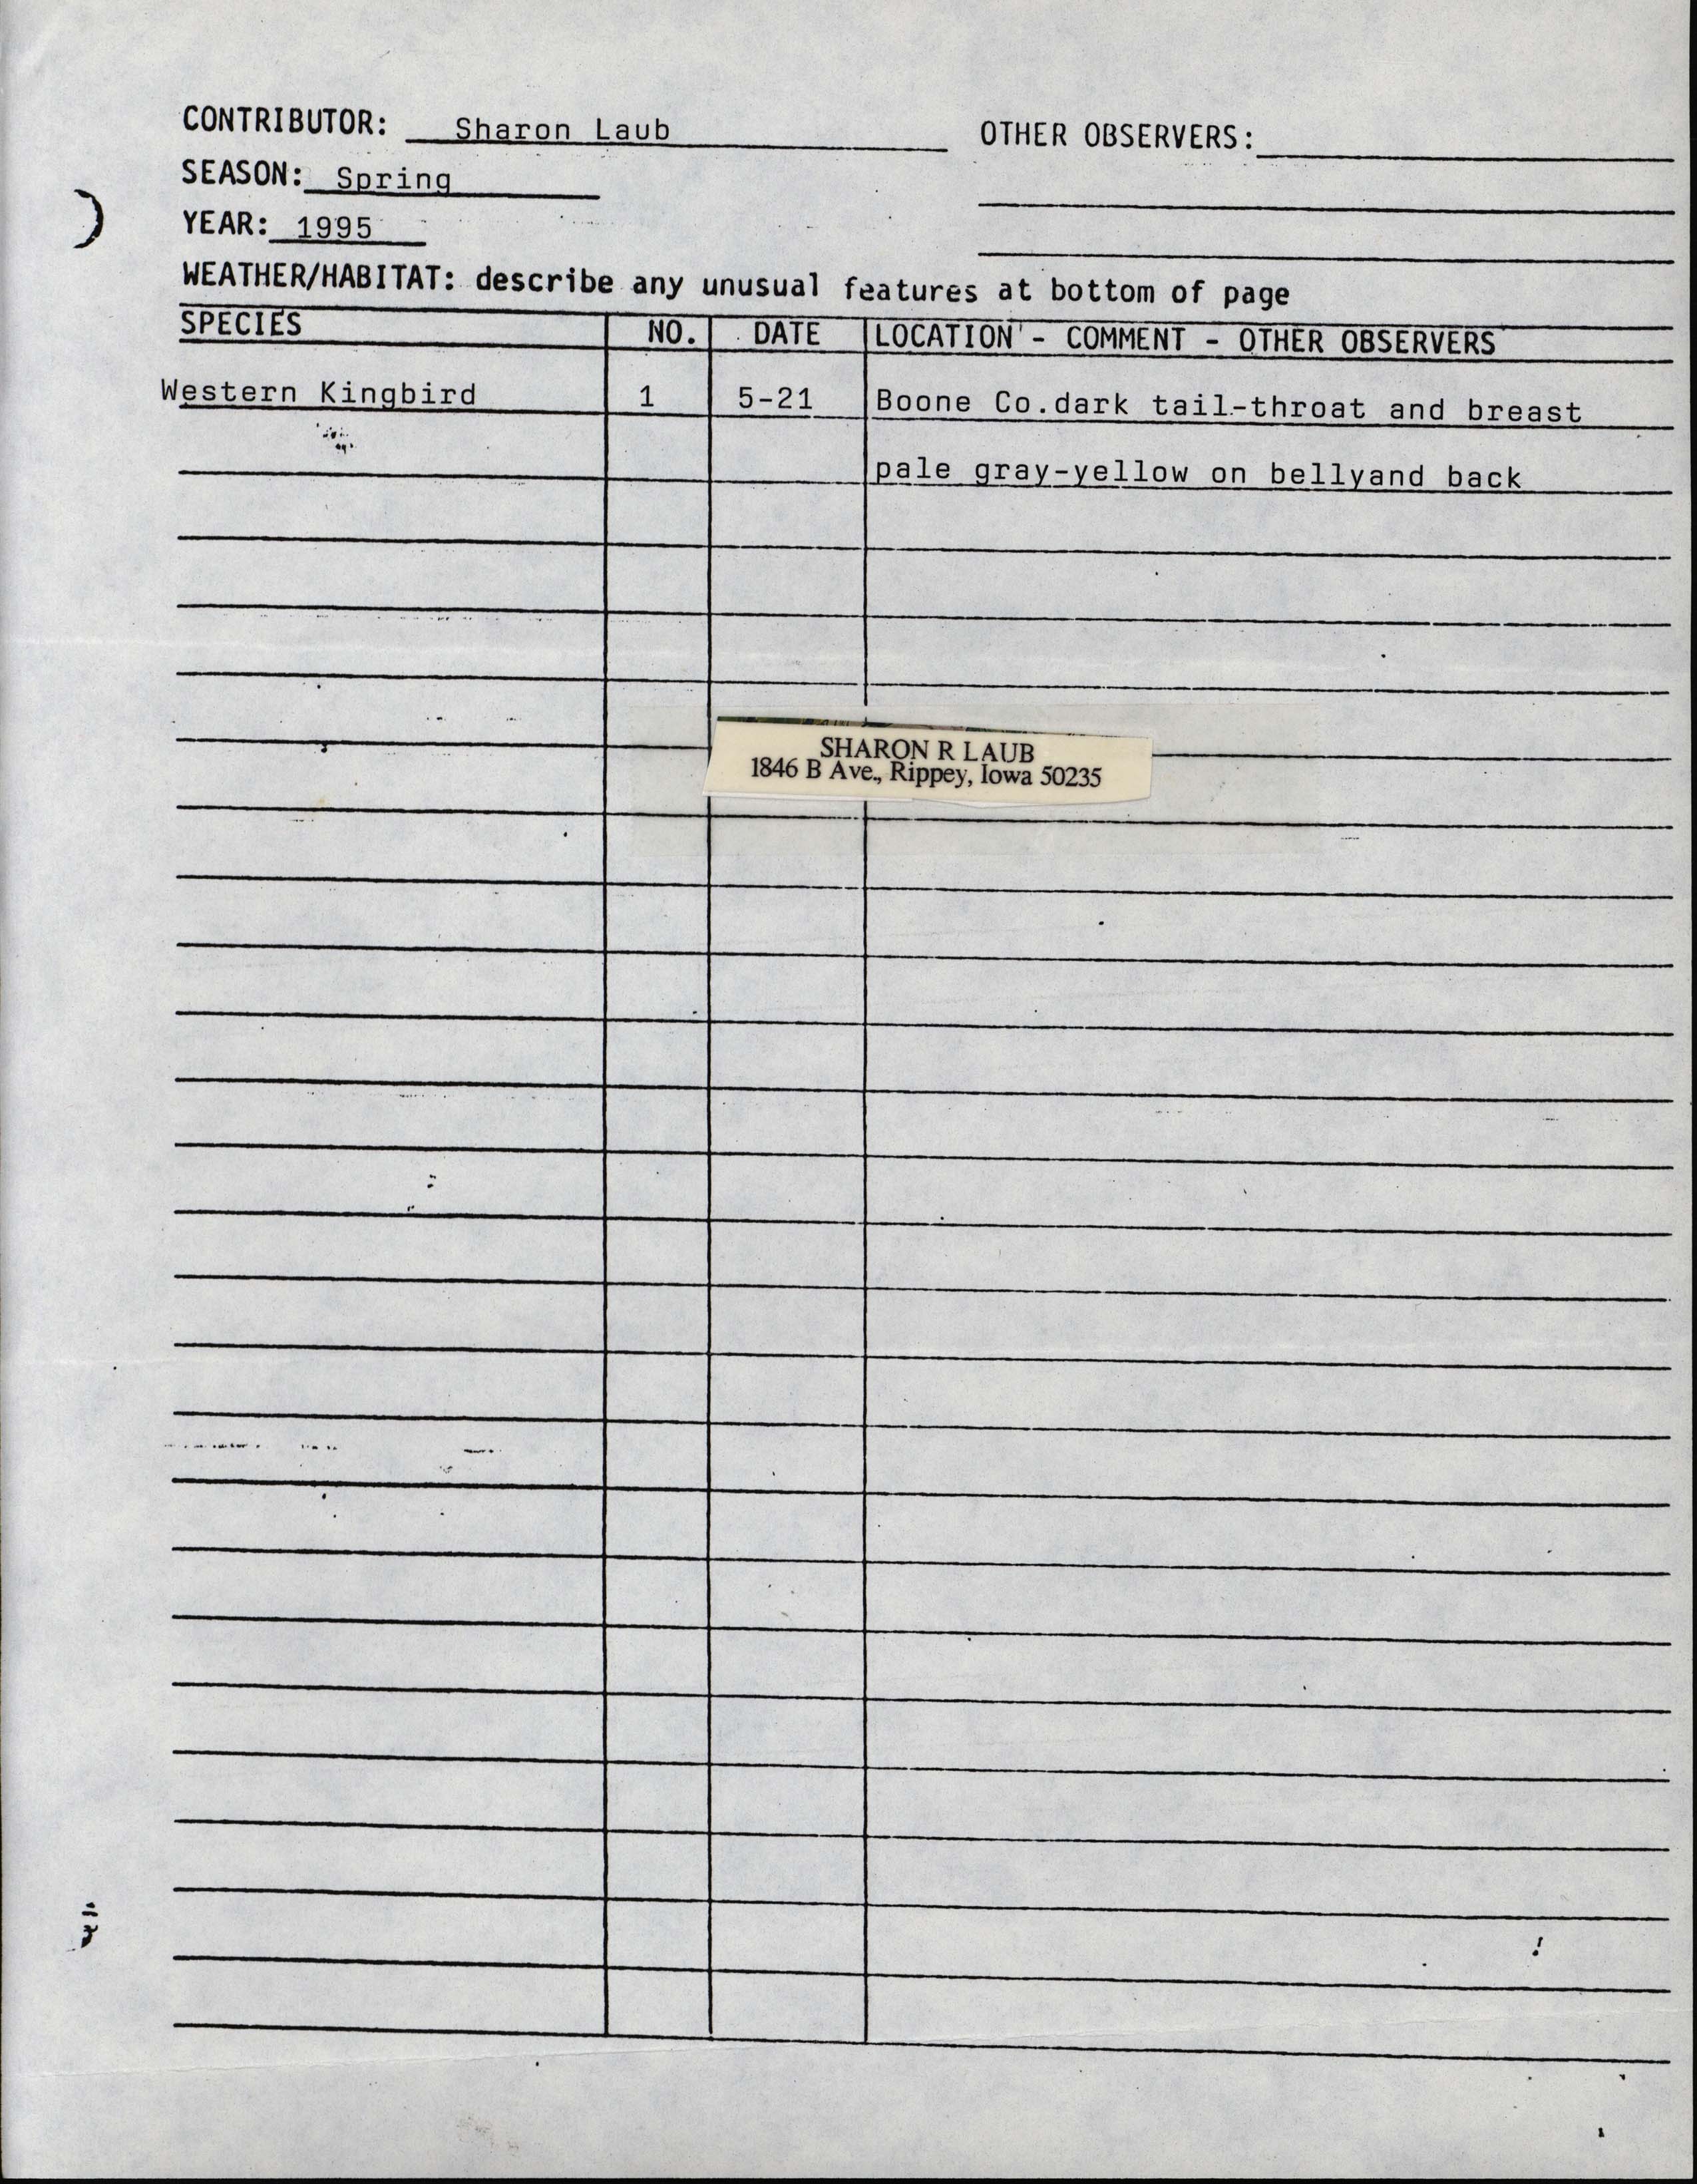 Field reports form for submitting seasonal observations of Iowa birds, spring 1995, Sharon Laub